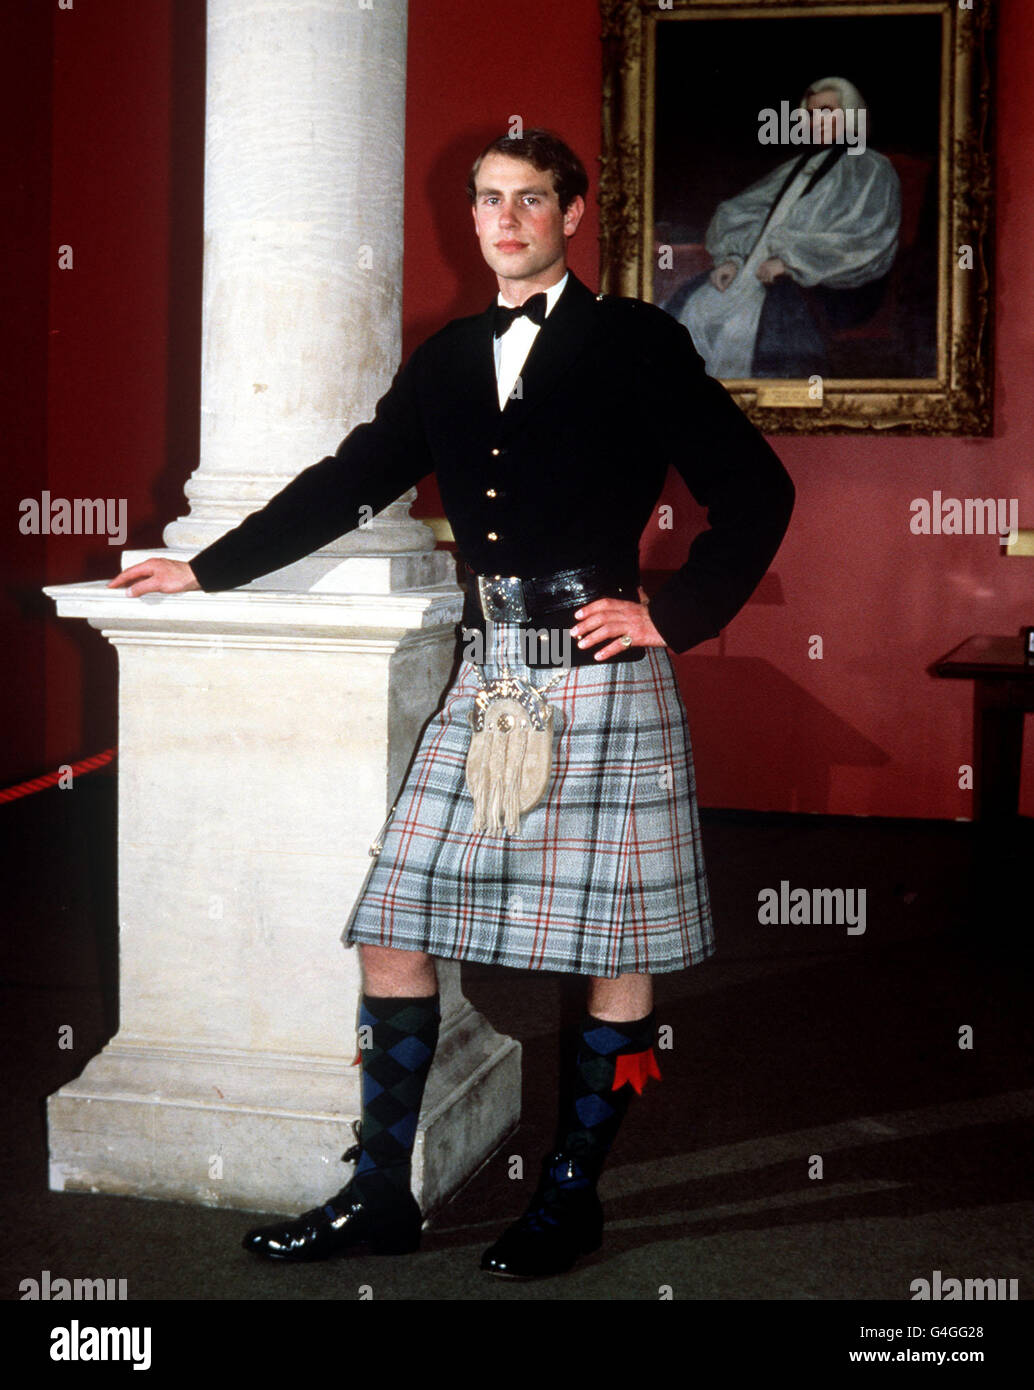 PA NEWS PHOTO 13/6/86 PRINCE EDWARD IN VICTORIAN STANCE ON STAGE AT THE PETERHOUSE THEATRE, CAMBRIDGE REHEARSING FOR A MUSICAL 'A VICTORIAN MUSICAL EVENING' IN AID OF THE DUKE OF EDINBURGH'S AWARD 36TH ANNIVERSARY TRIBUTE SCHEME Stock Photo